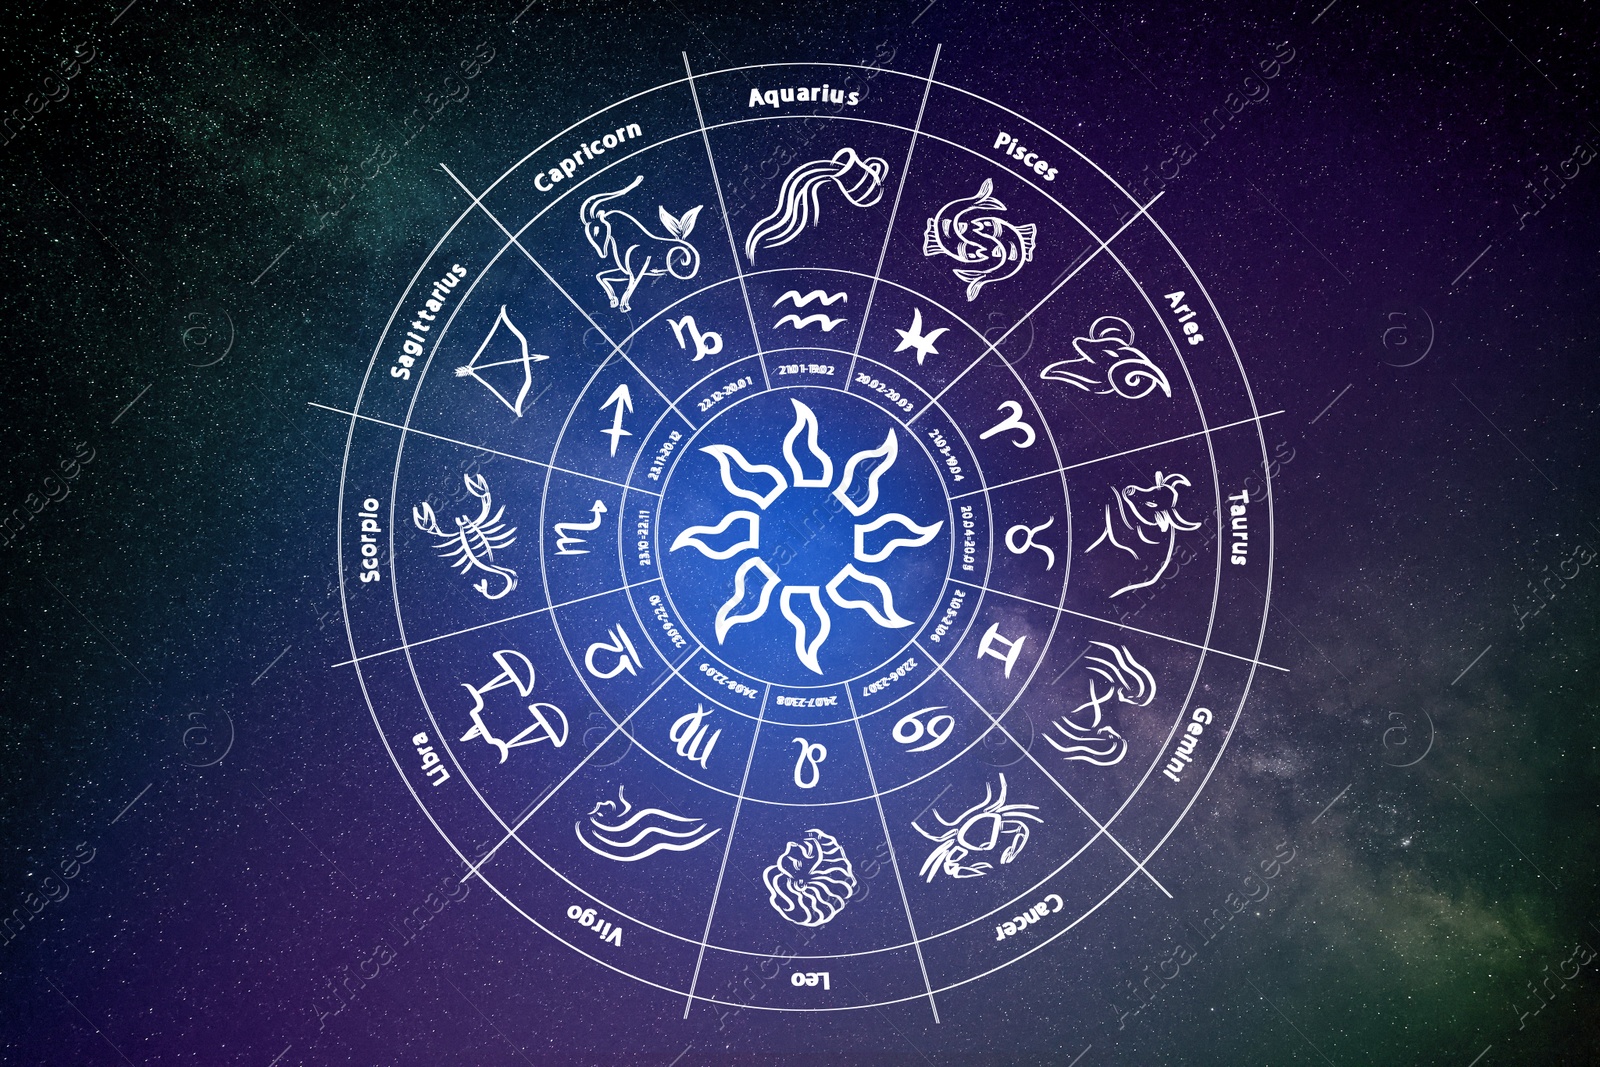 Image of Zodiac wheel showing 12 signs against space